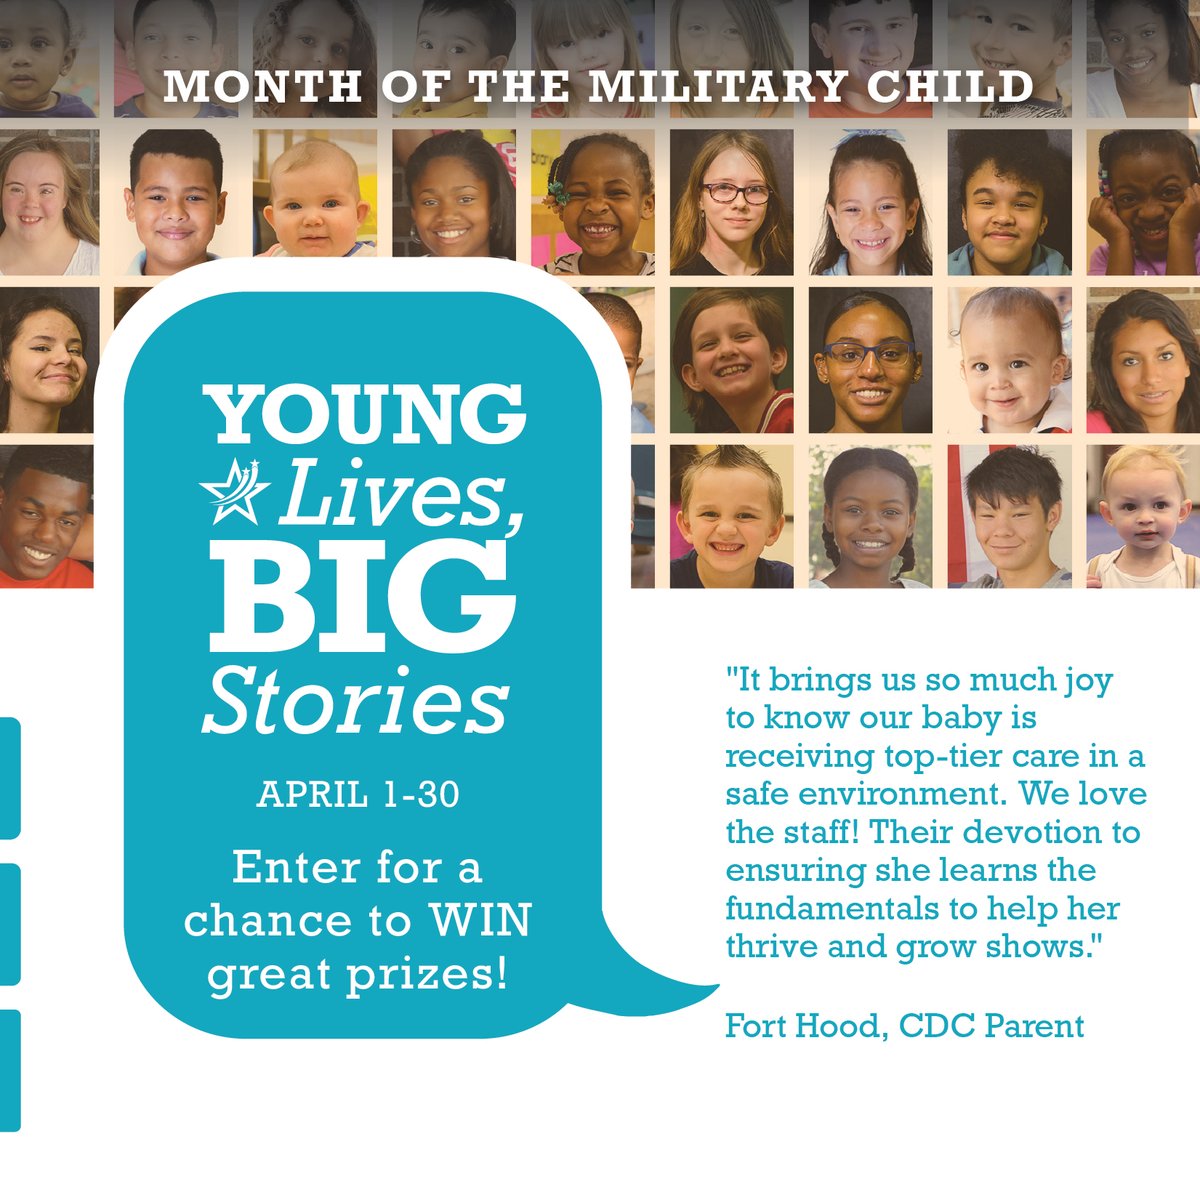 ❣️Army children and youth, get ready to tell YOUR story! The Young Lives, BIG Stories Contest opens in April and you could WIN great PRIZES! How do you answer, “What does it mean to be a military child or youth?” ArmyMWR.com/YLBS #ArmyMOMC2023